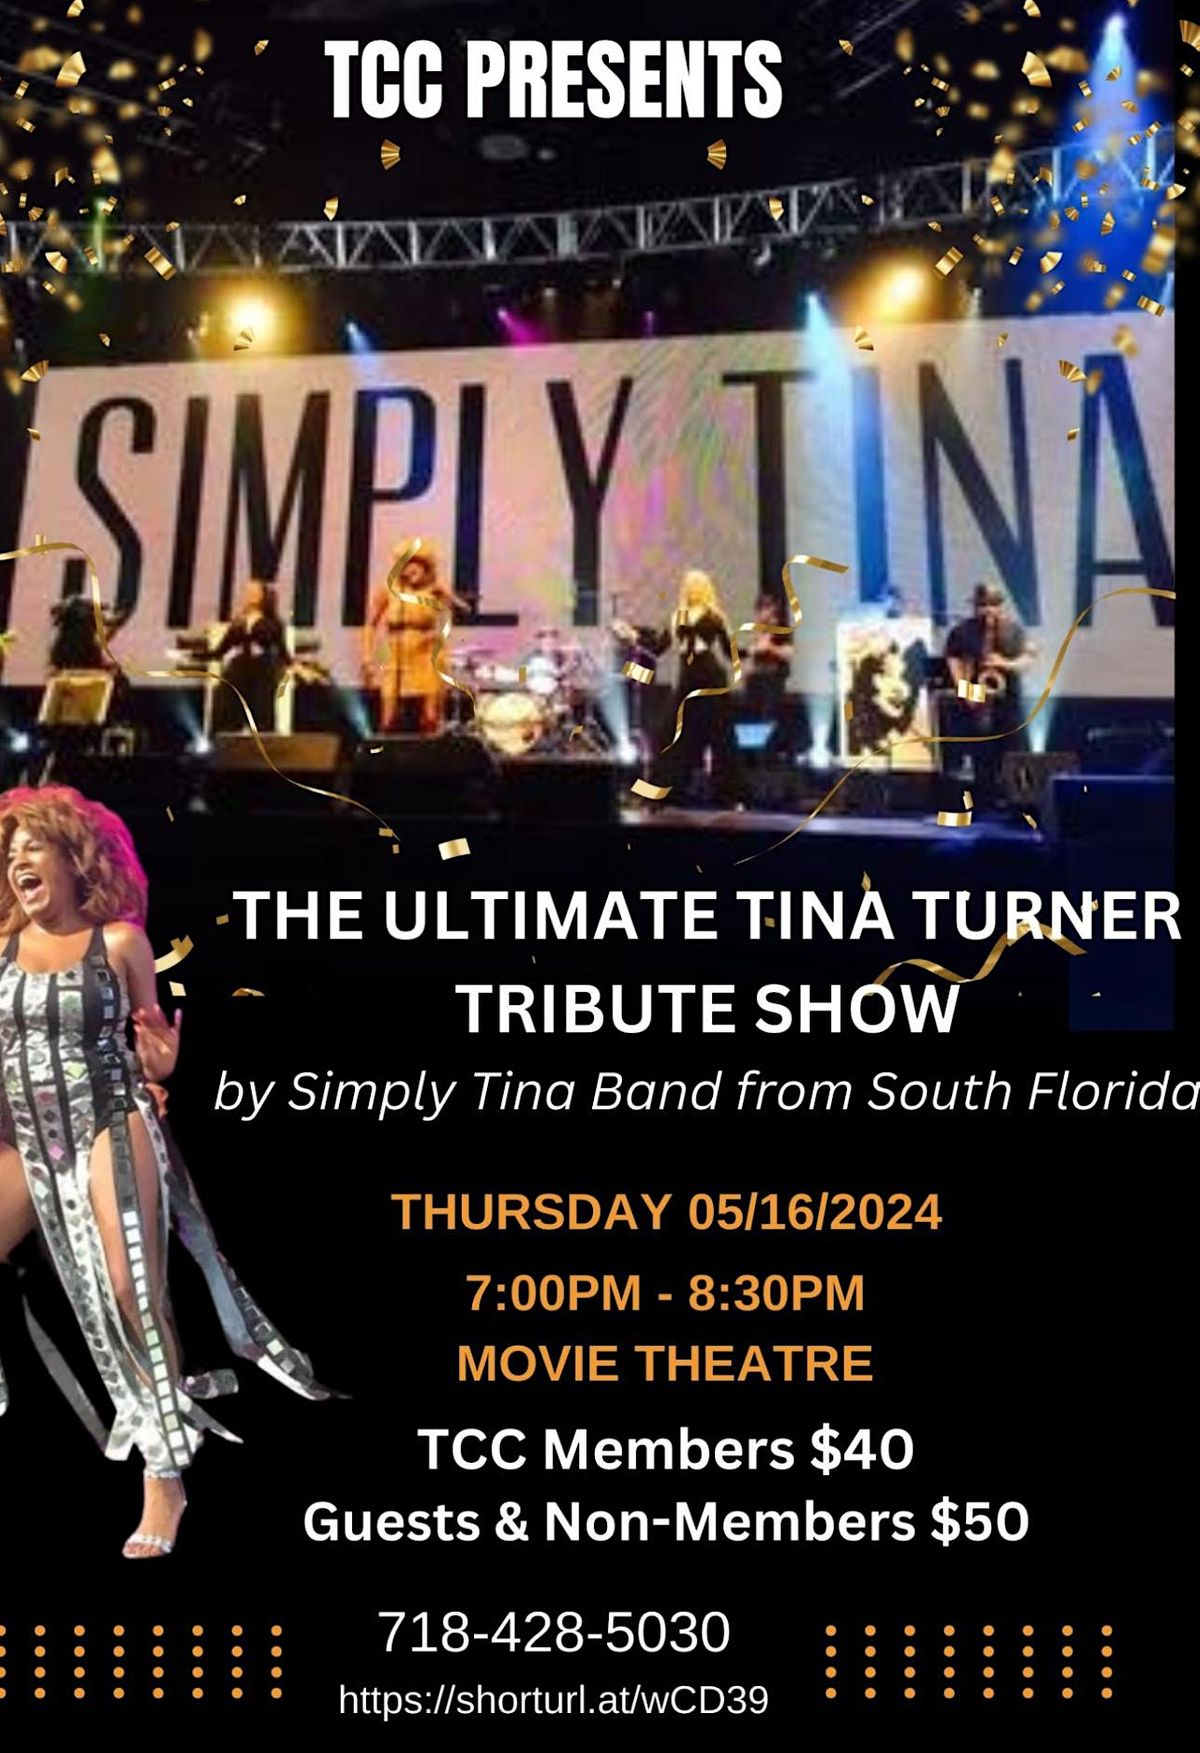 THE ULTIMATE TINA TURNER TRIBUTE SHOW by Simply Tina Band from South FL